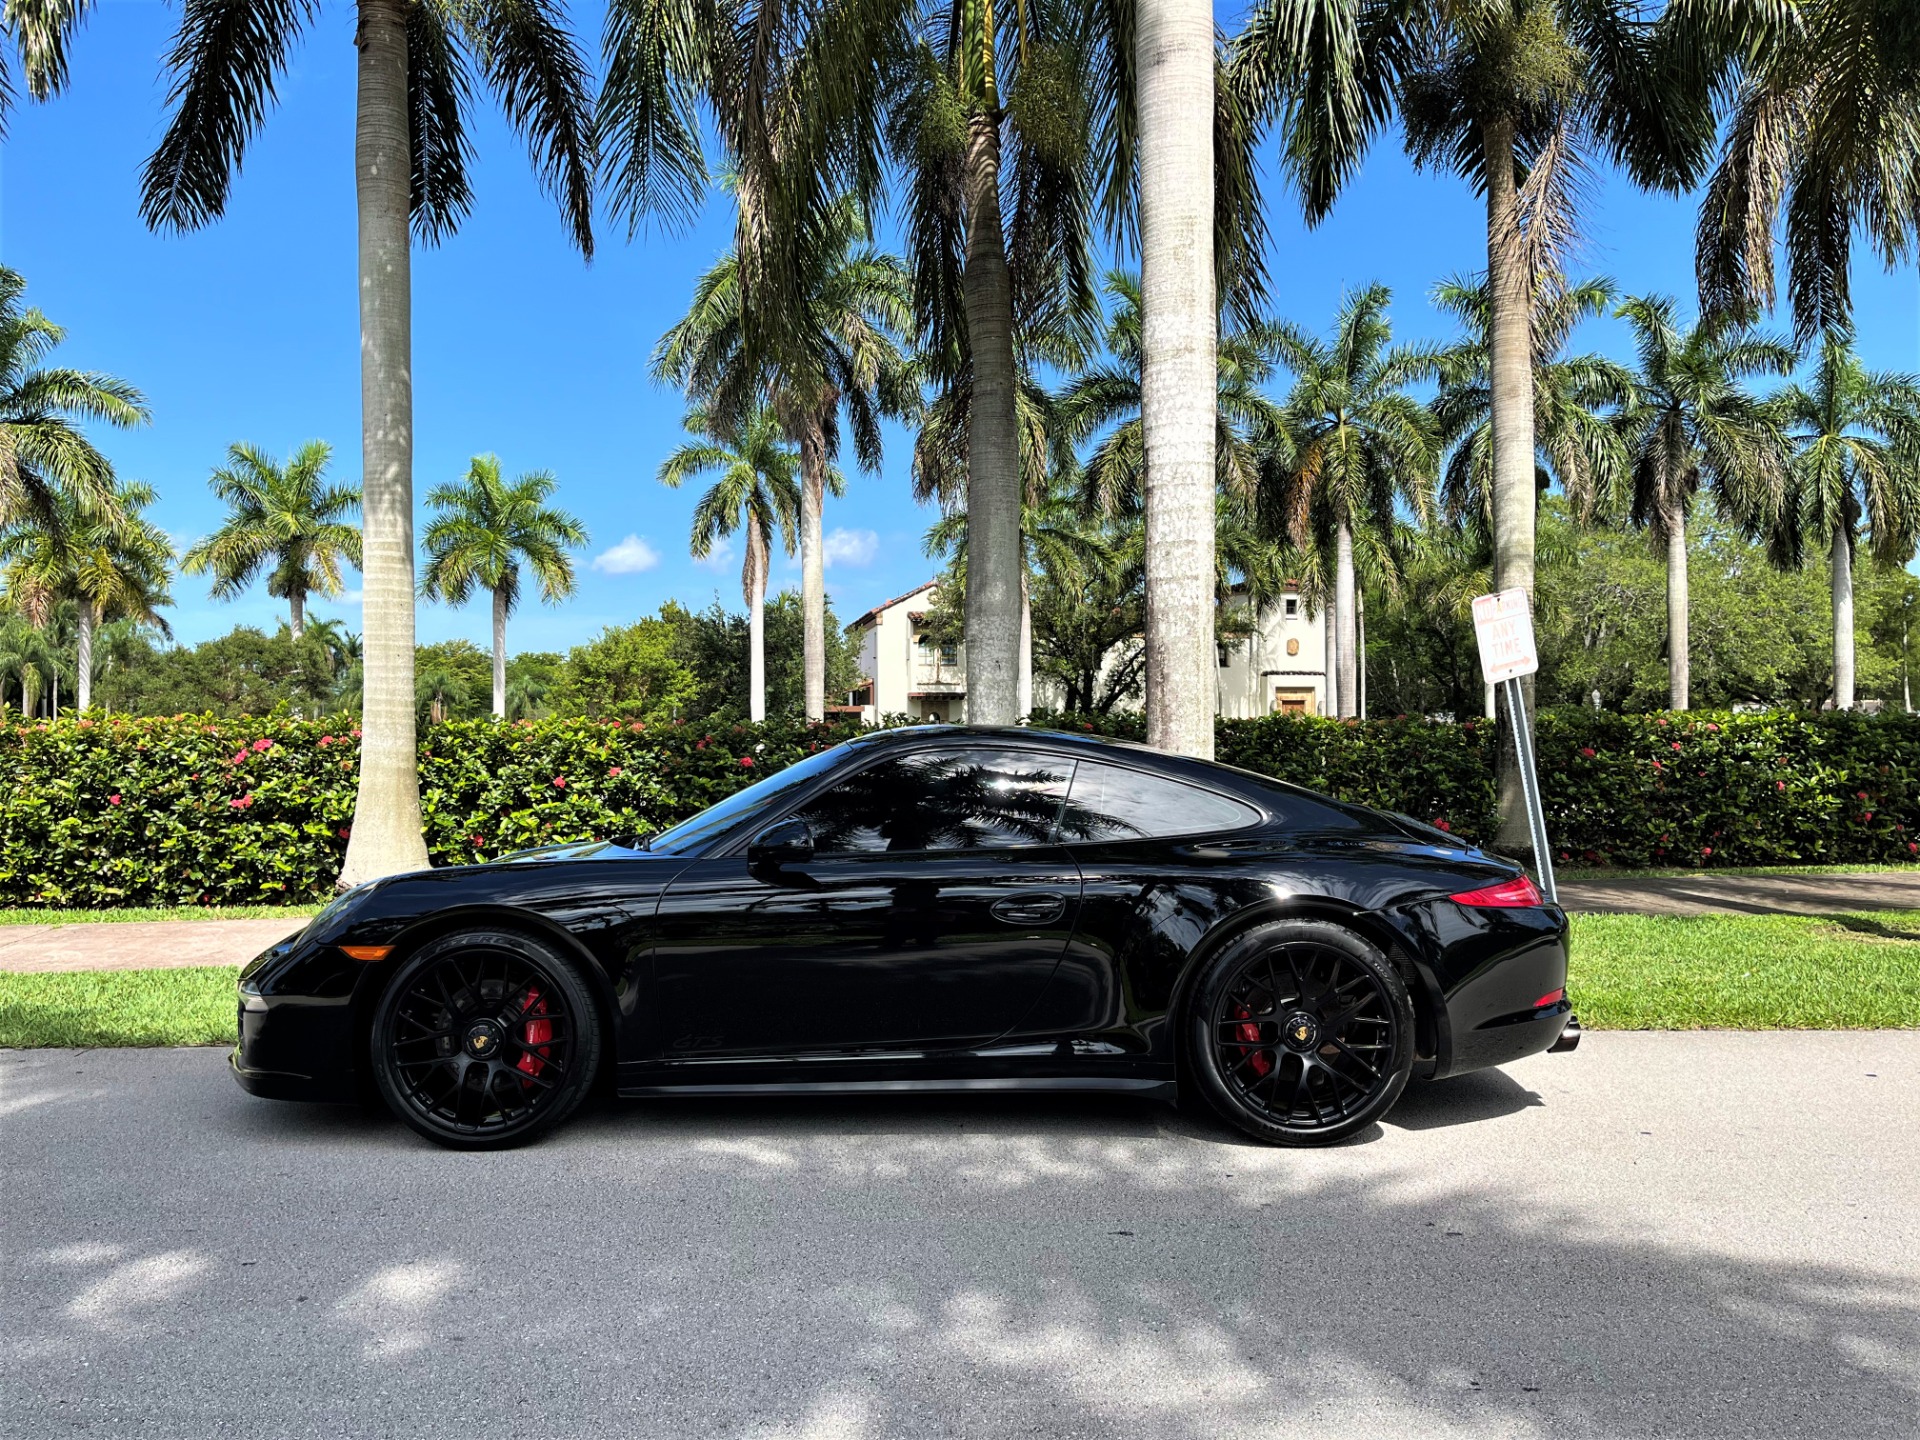 Used 2016 Porsche 911 Carrera 4 GTS for sale Sold at The Gables Sports Cars in Miami FL 33146 2